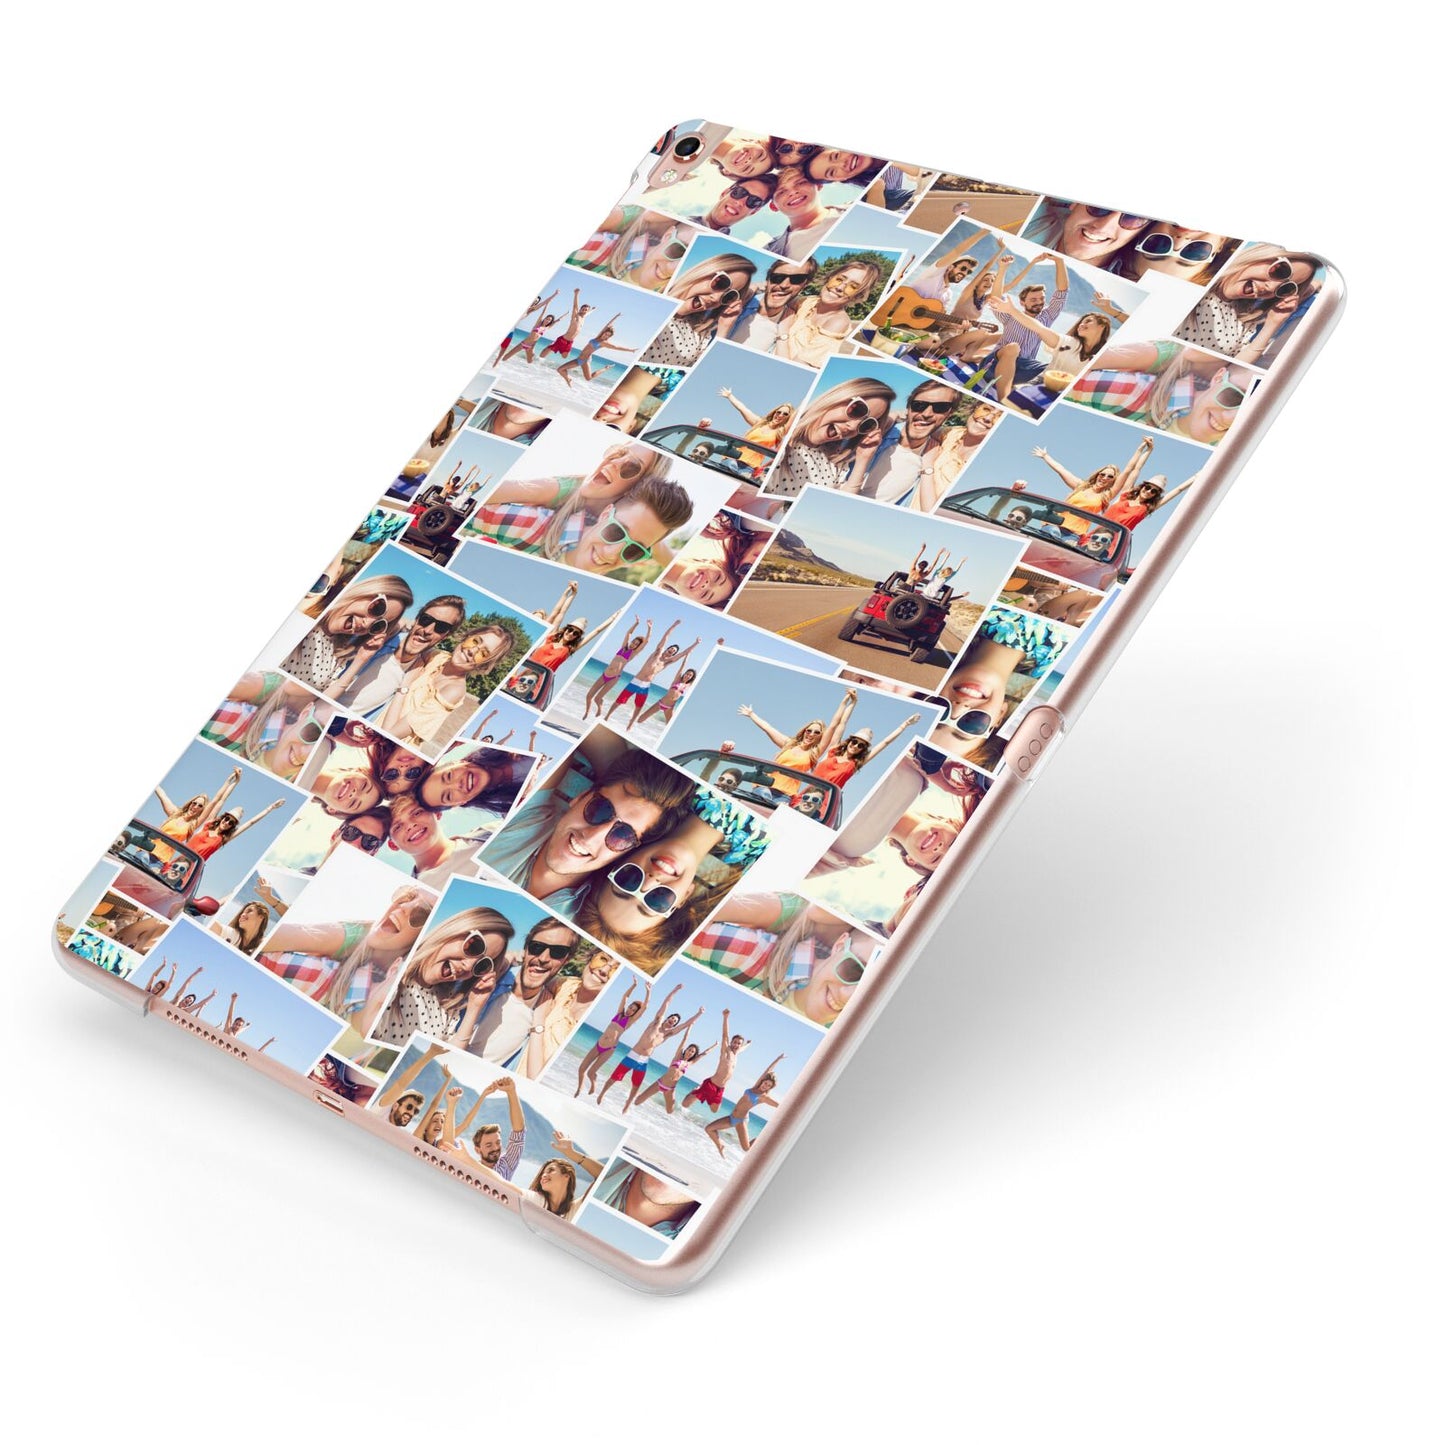 Photo Montage Apple iPad Case on Rose Gold iPad Side View